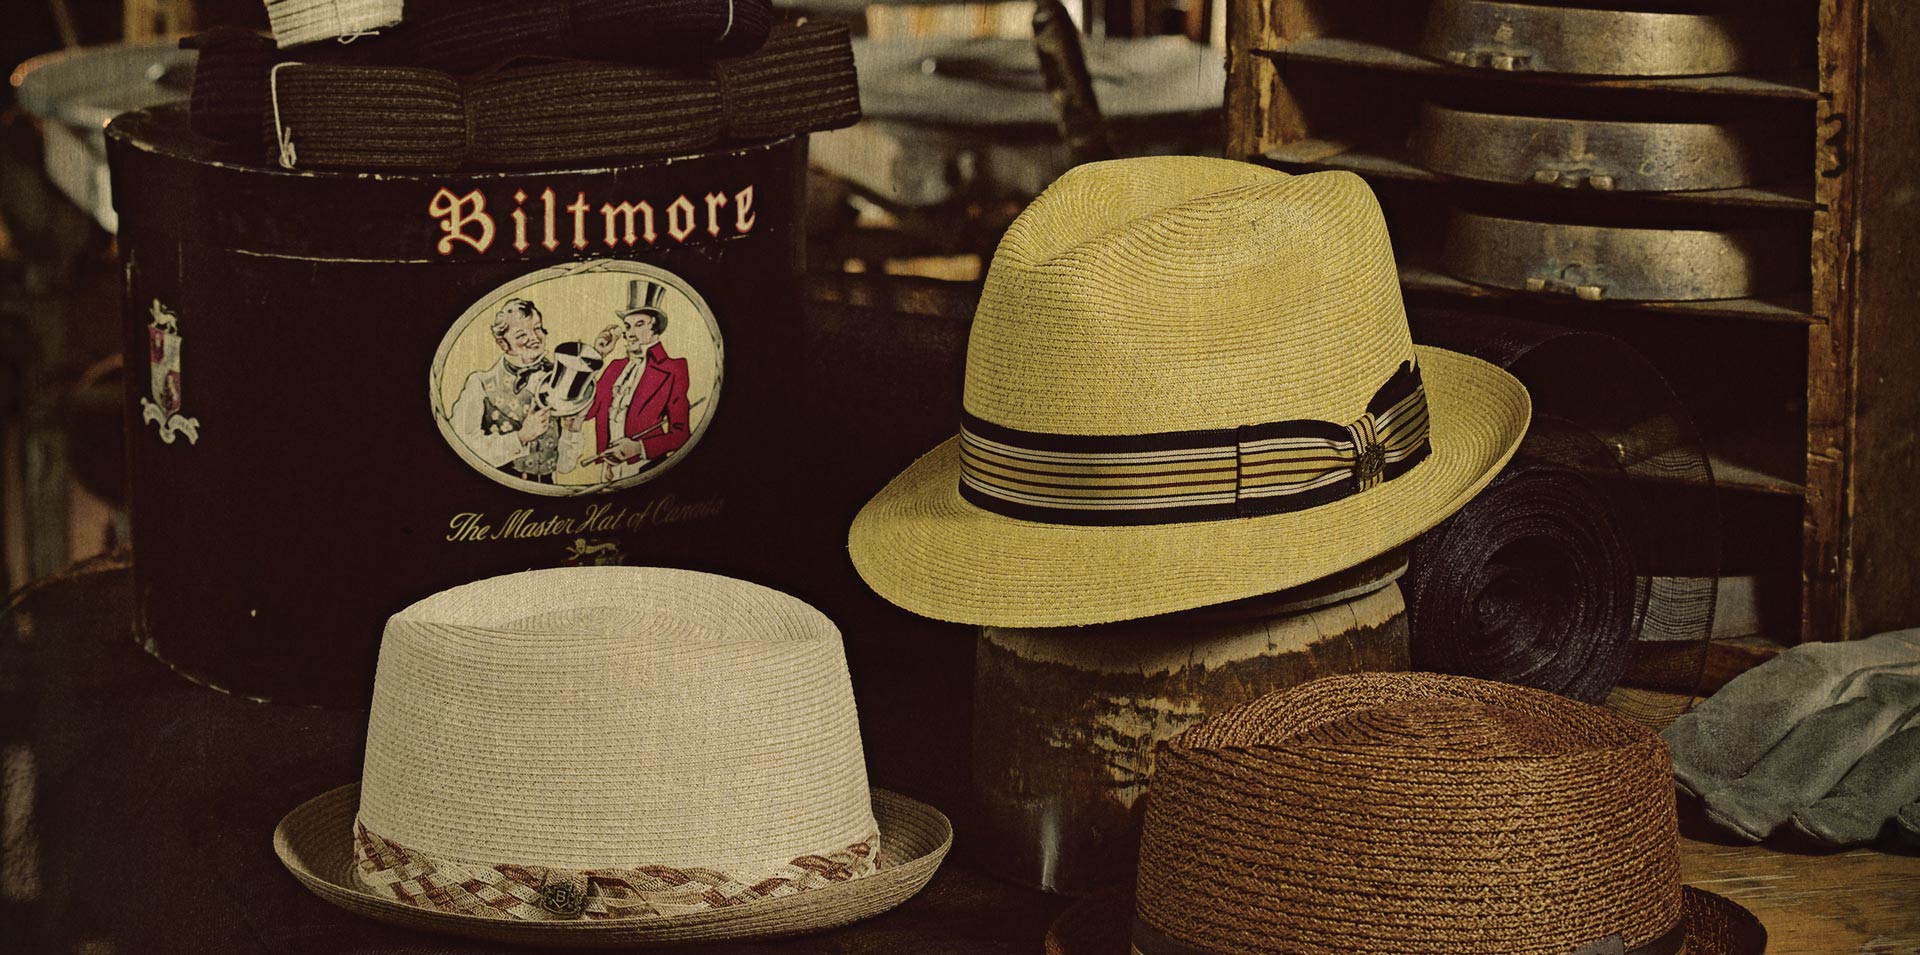 A sepia tone photo of hats resting on boxes branded with Biltmore near hat blocks on a shelf